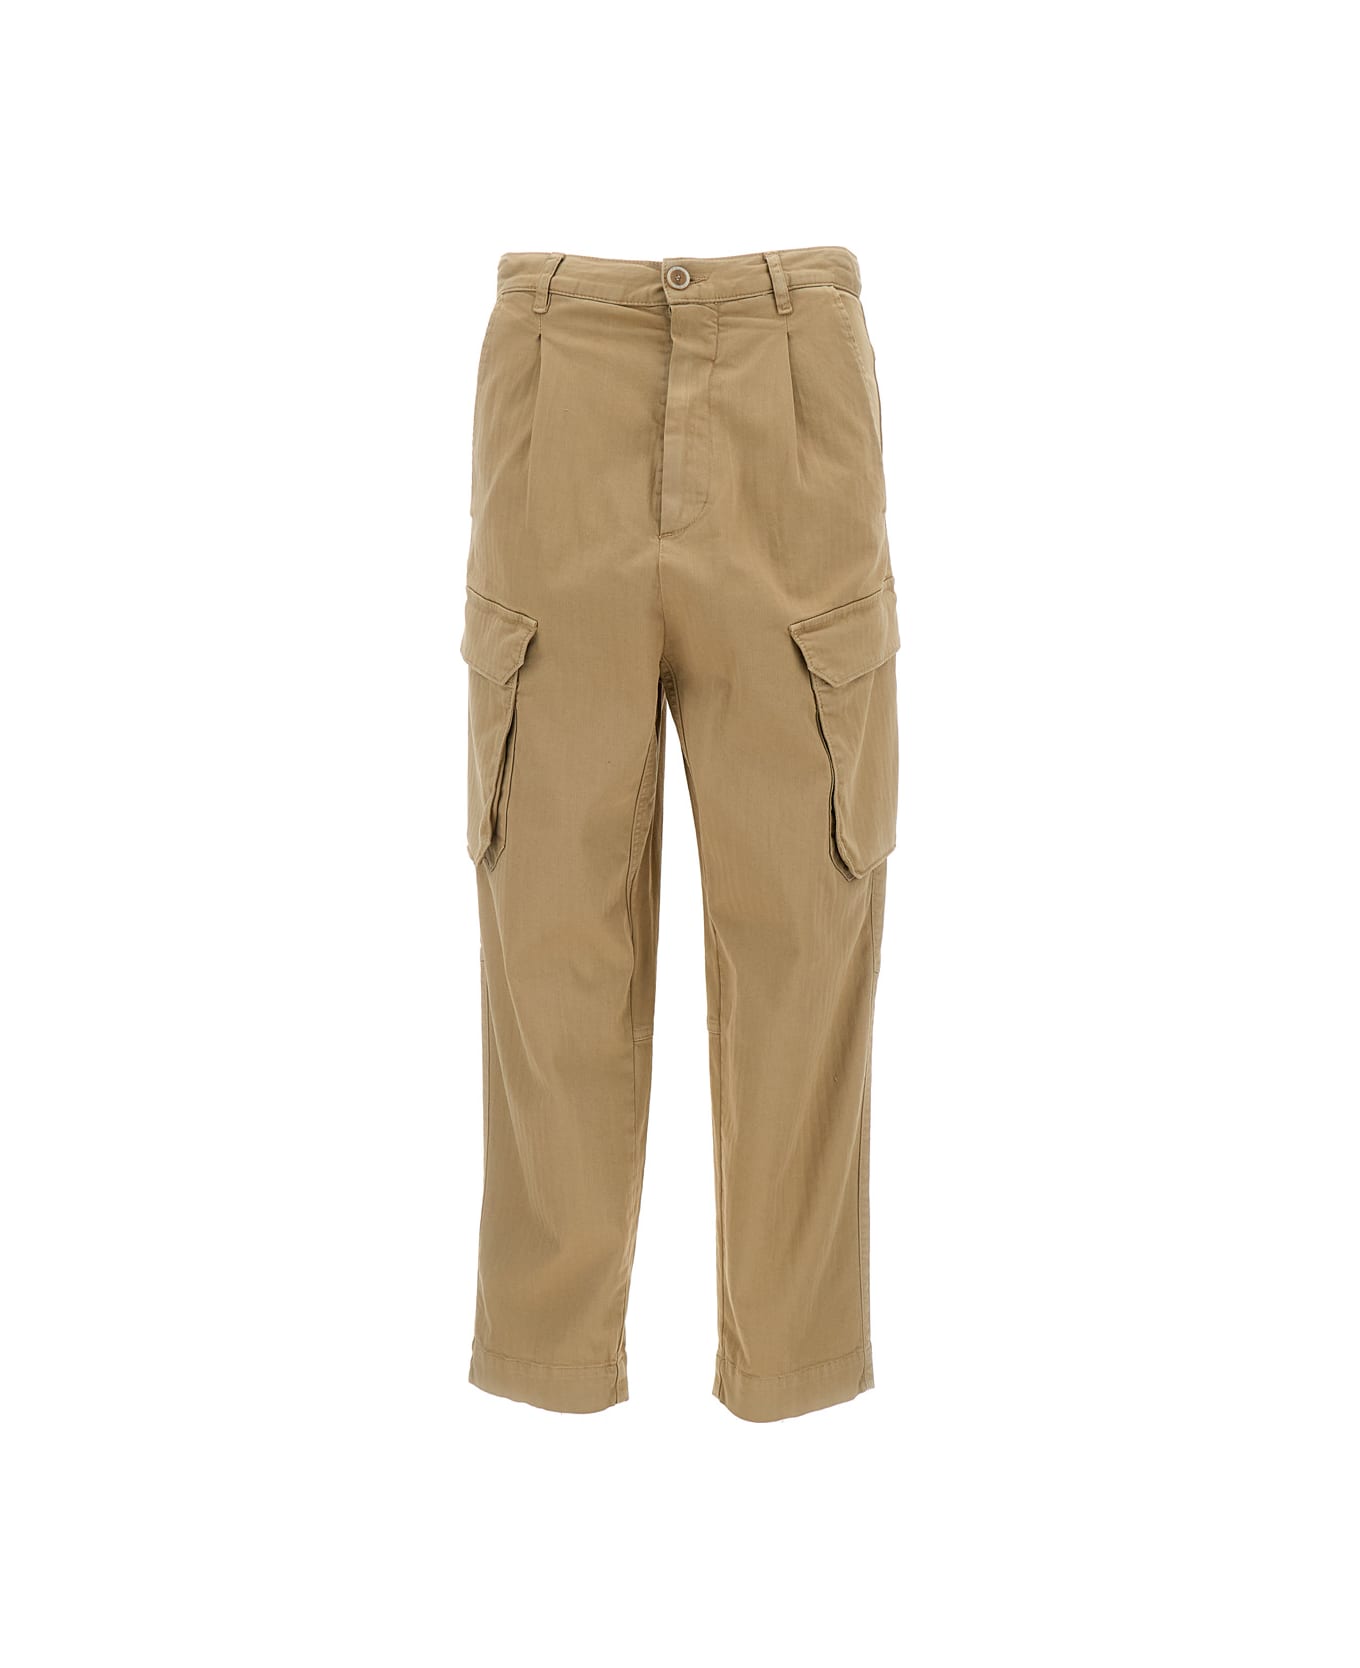 SEMICOUTURE Sand-colored Cargo Pants In Cotton Blend Woman - Beige